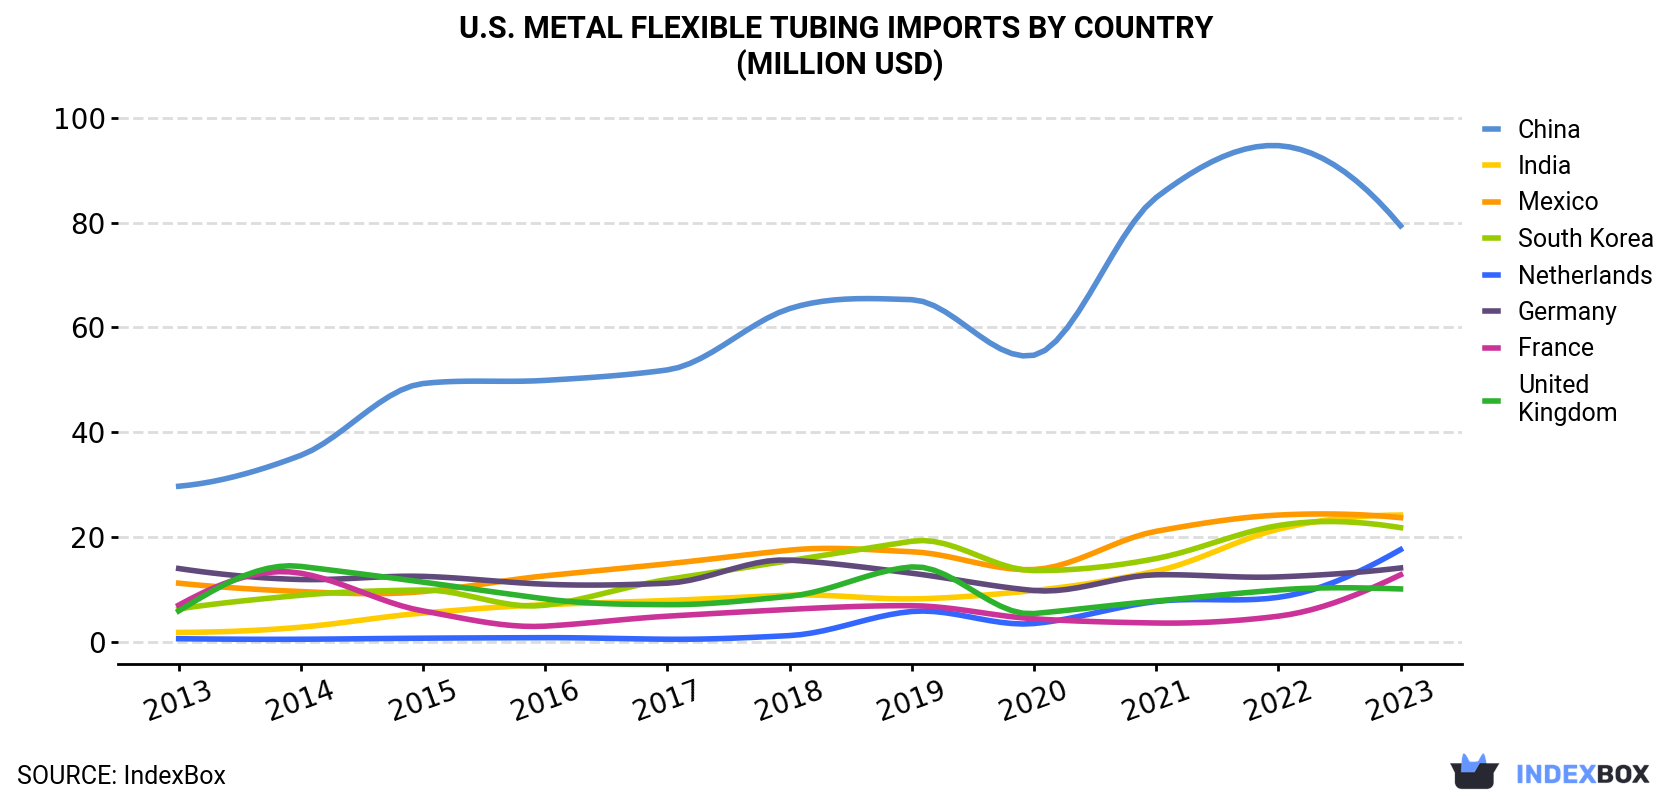 U.S. Metal Flexible Tubing Imports By Country (Million USD)